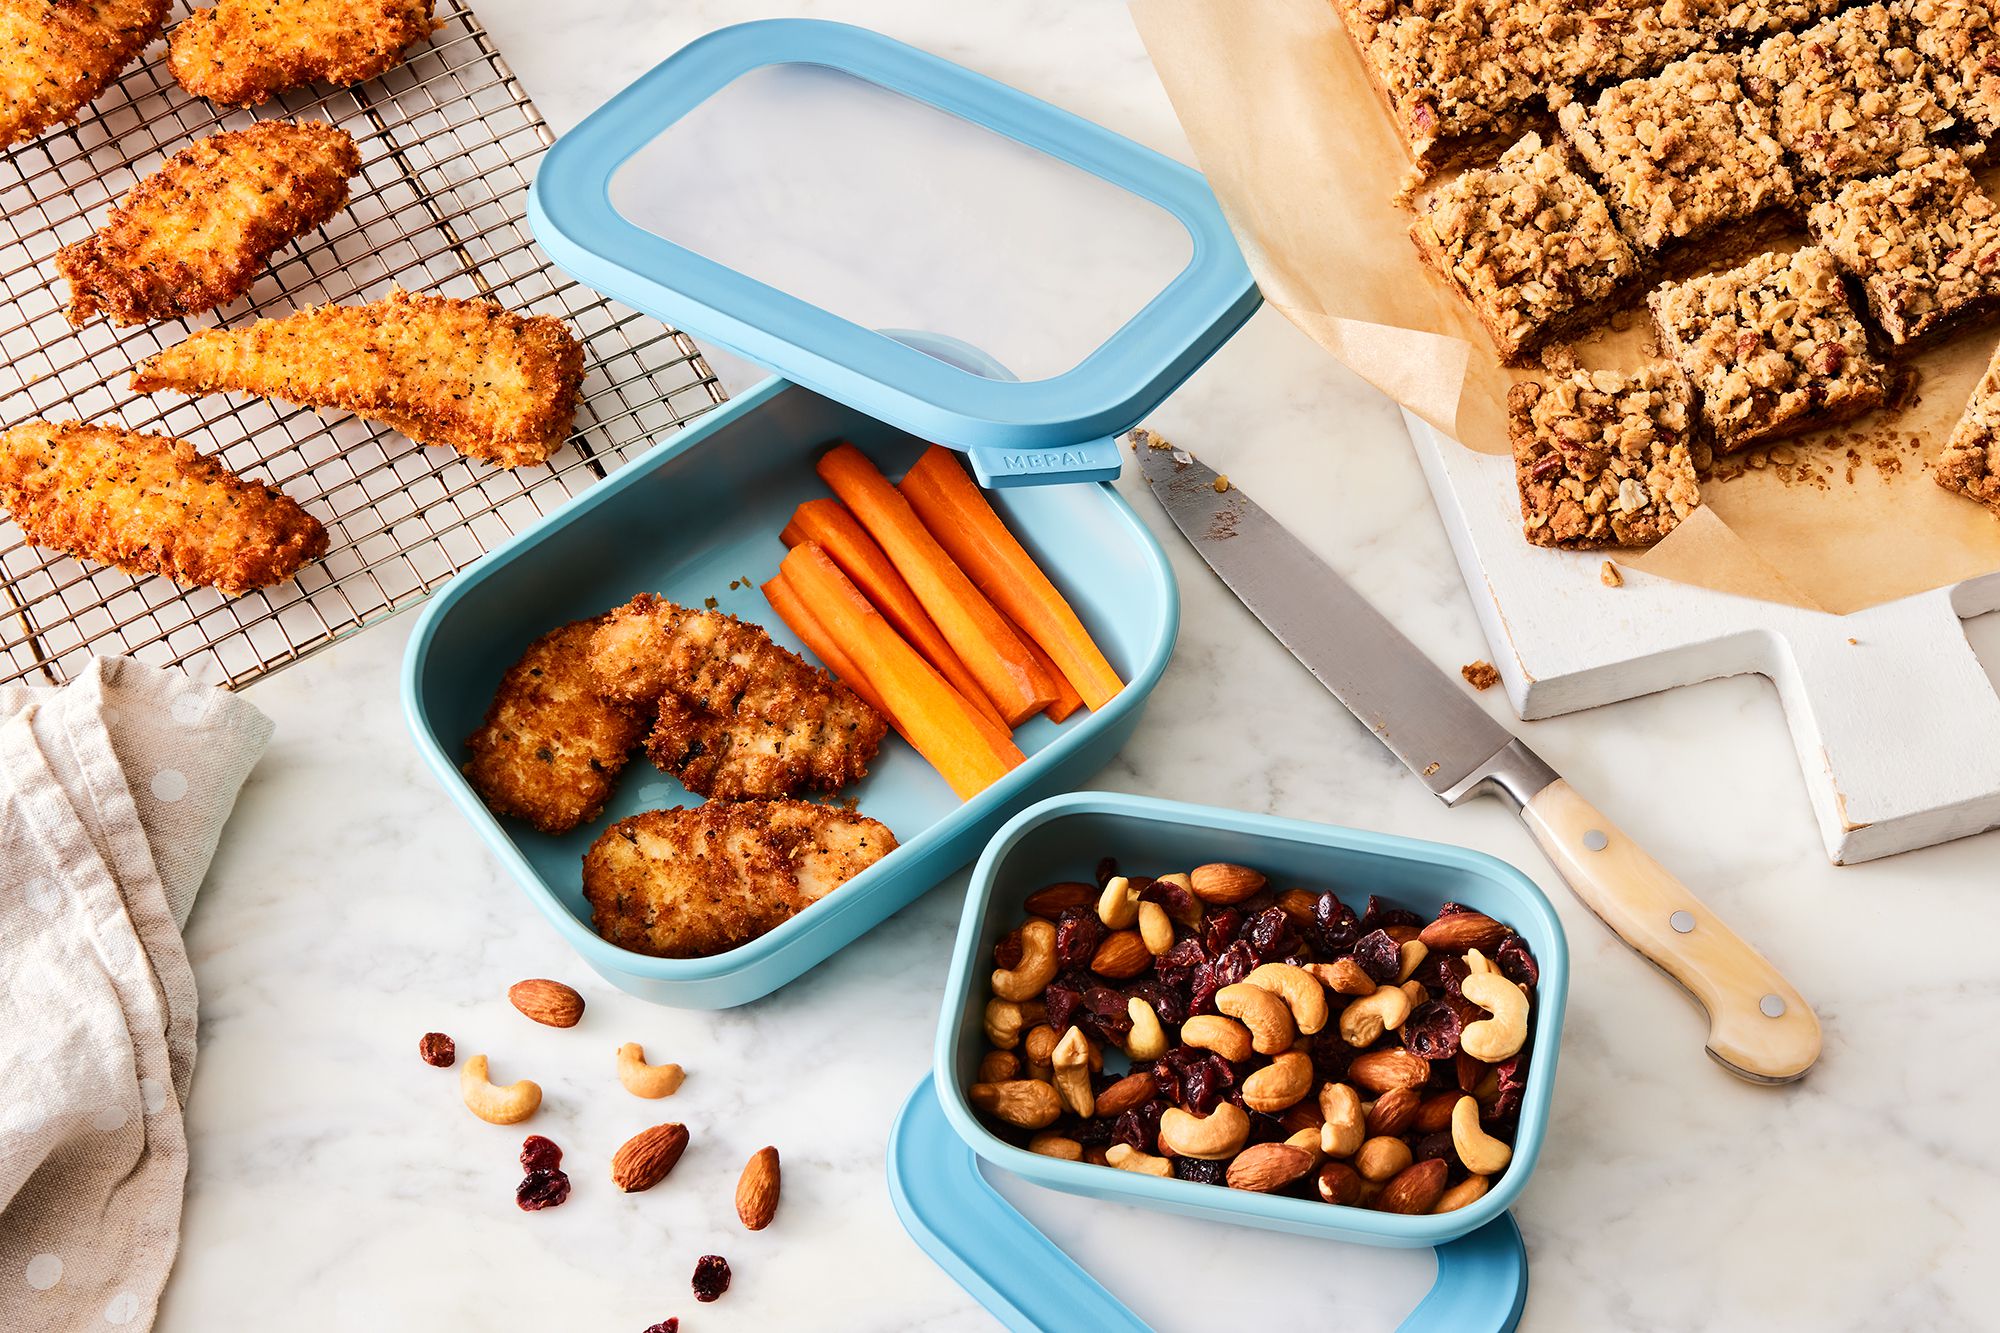 7 Meal-Planning Tips for the Busy School Season